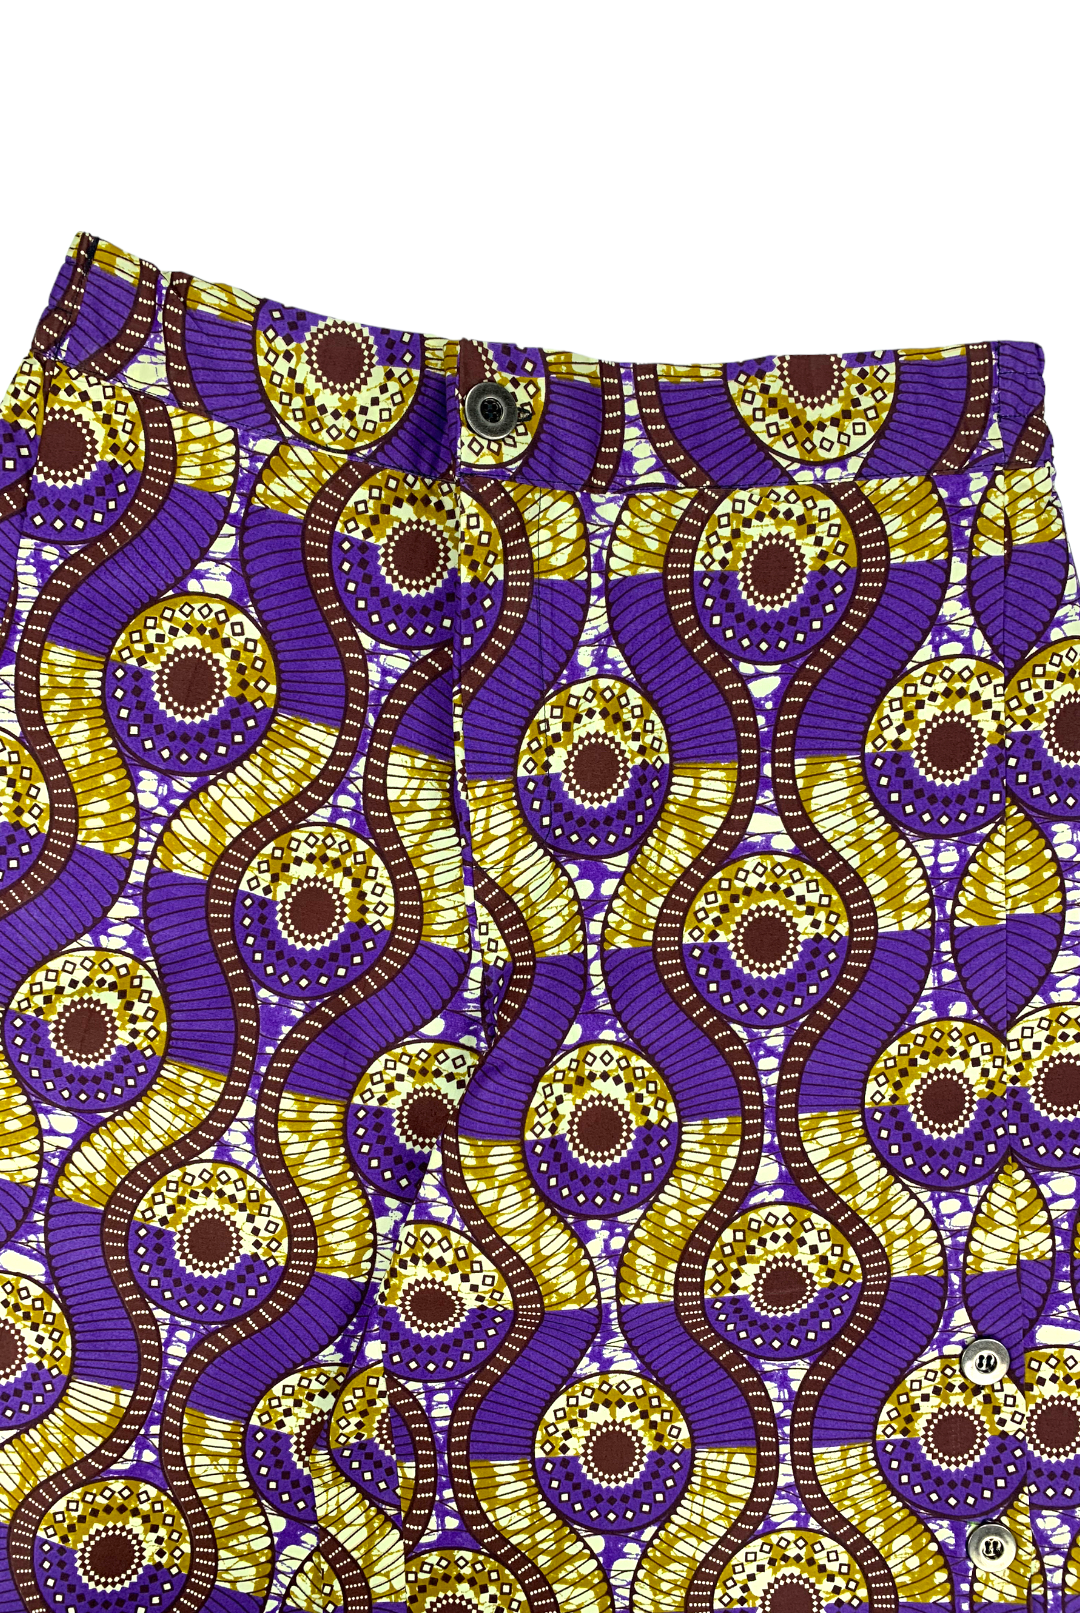 AFRICAN CROPPED PANTS